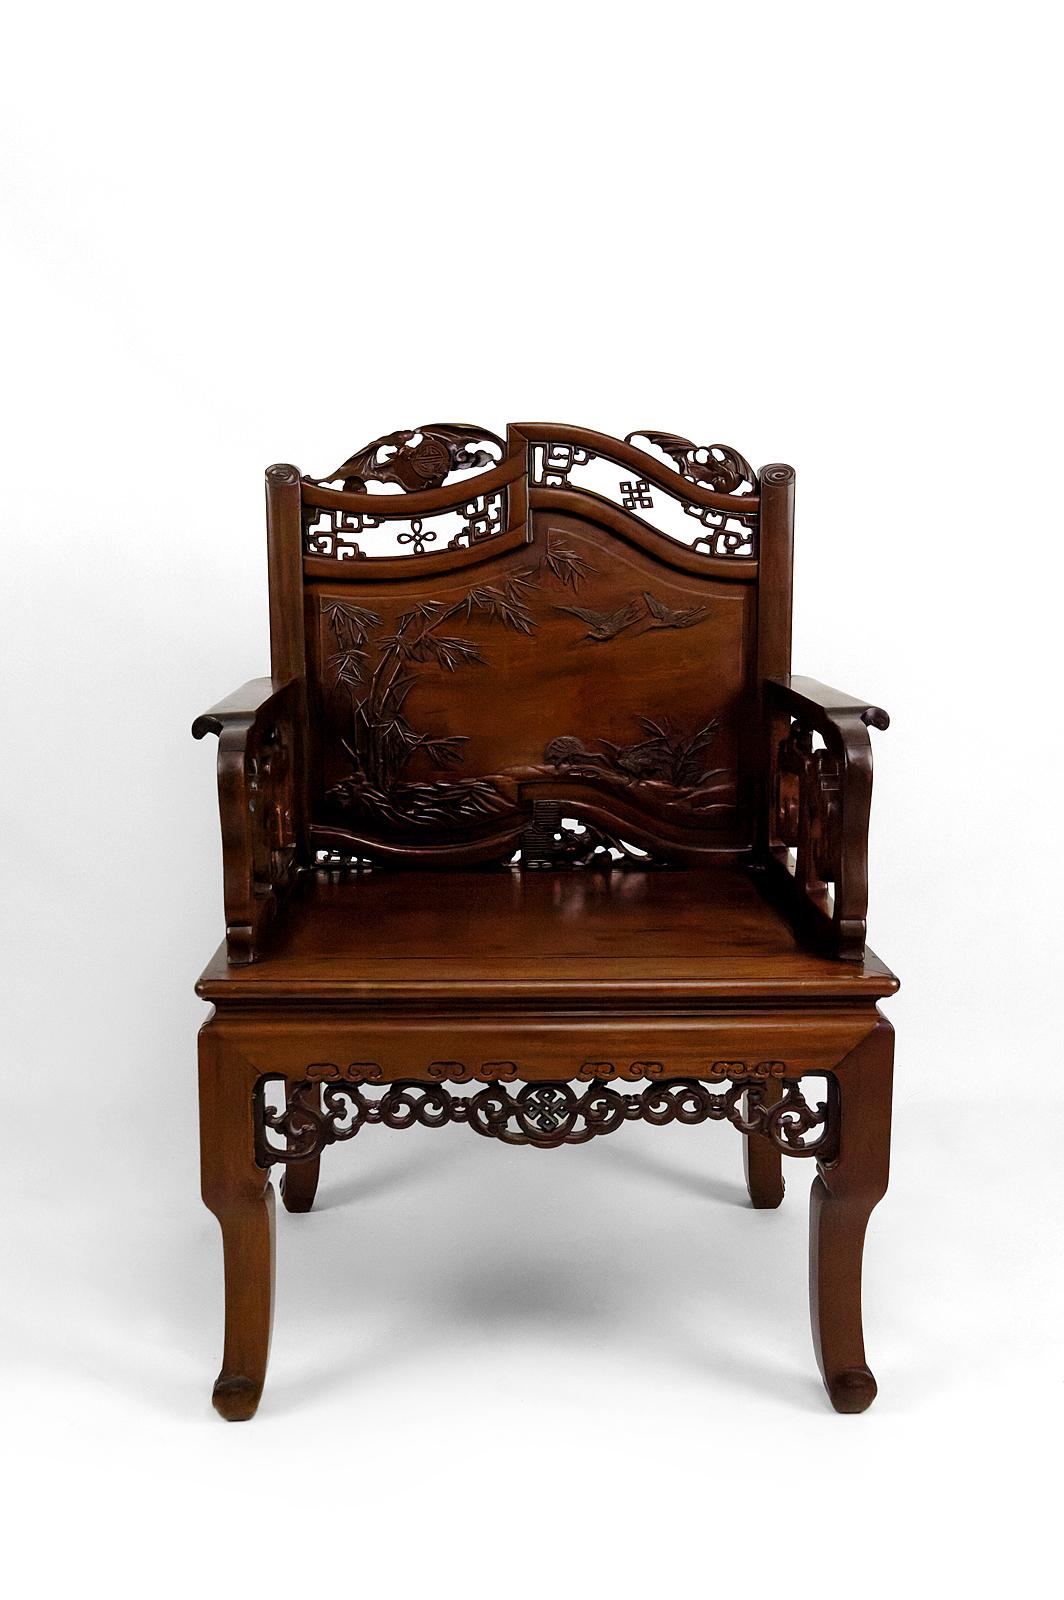 Superb set of 4 important Asian armchairs in carved Chinese mahogany wood (toona sinensis).

Carved with plant and animal motifs: 3 sculpted bats (symbols of good fortune, happiness and longevity), in the center of each file is a scene depicting